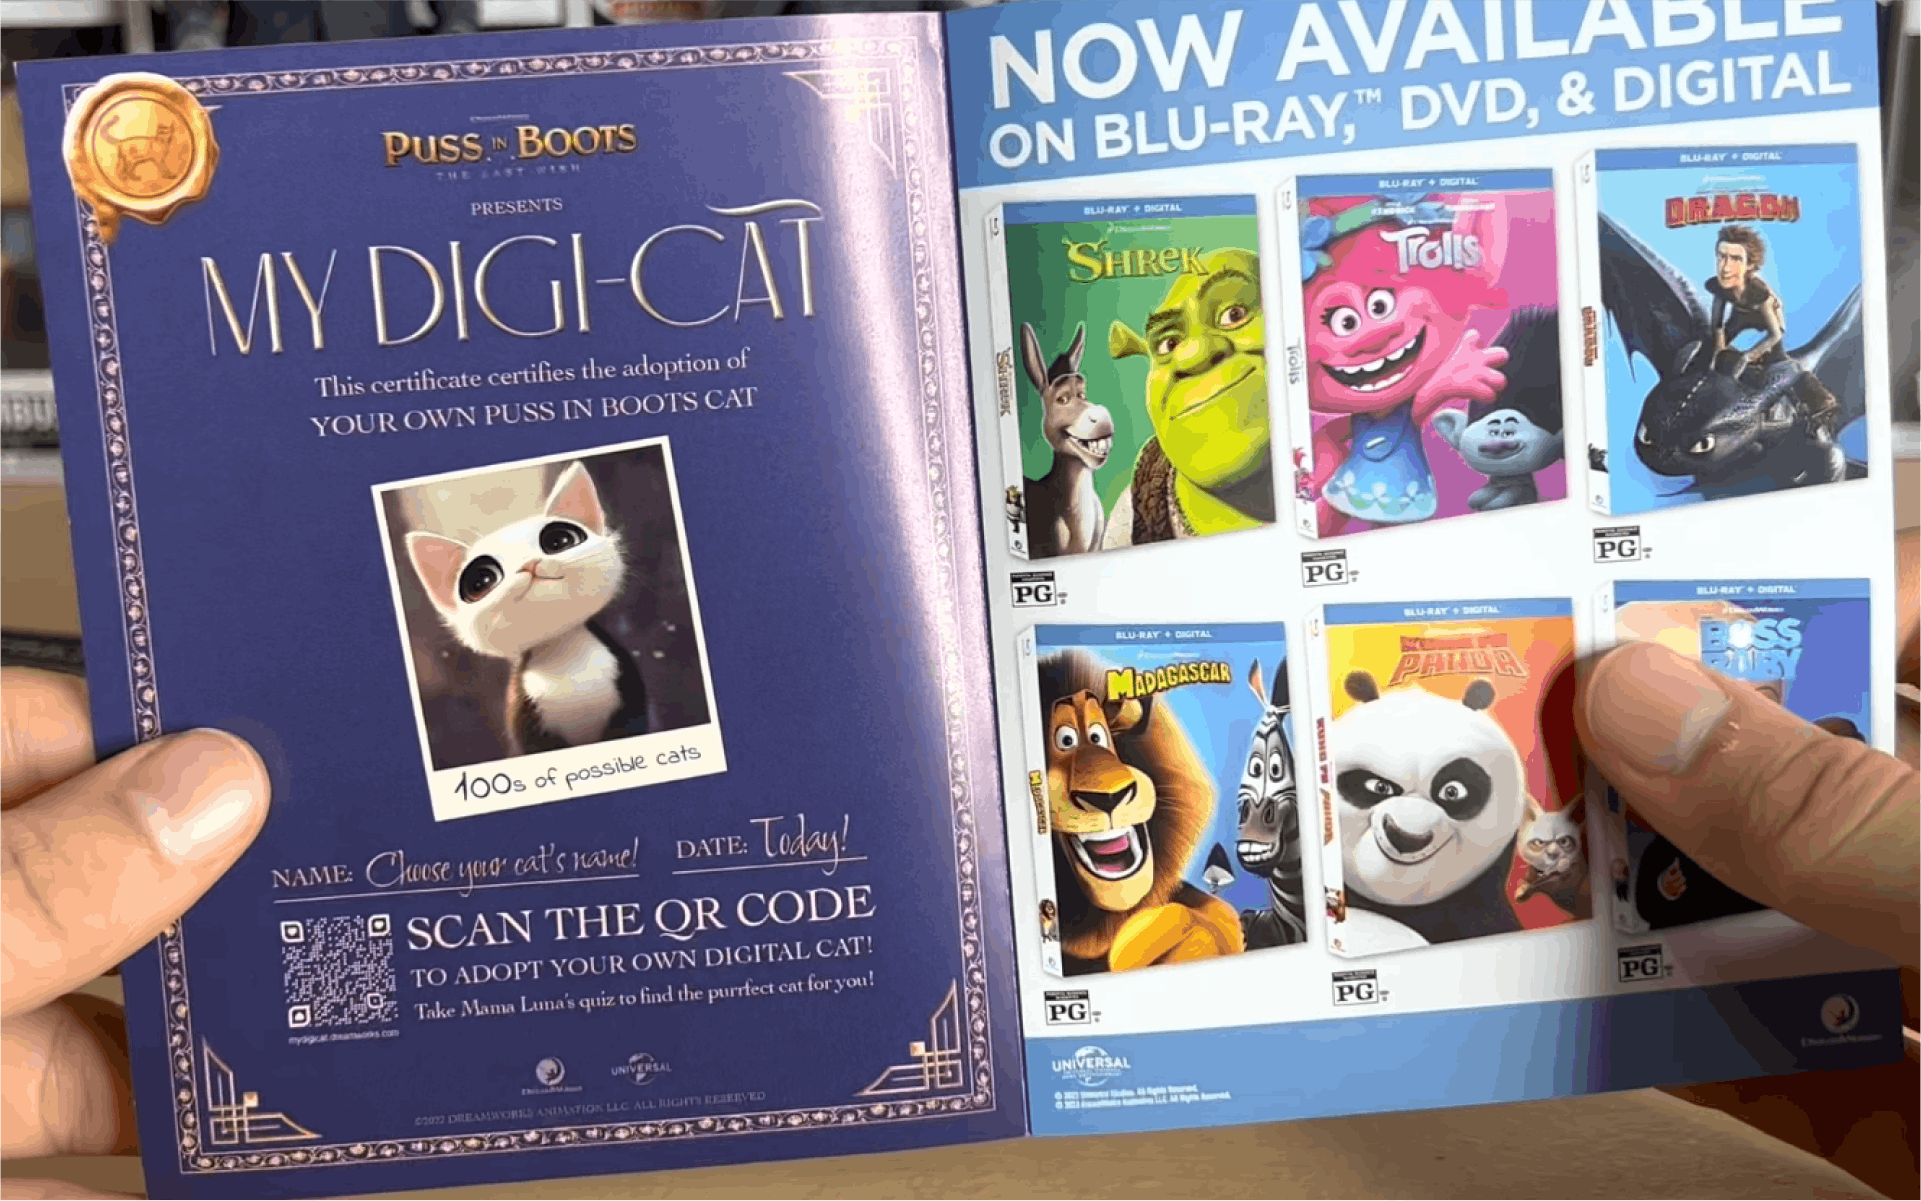 An image of a DVD leaflet containing a QR code for the My Digi-Cat experience. 